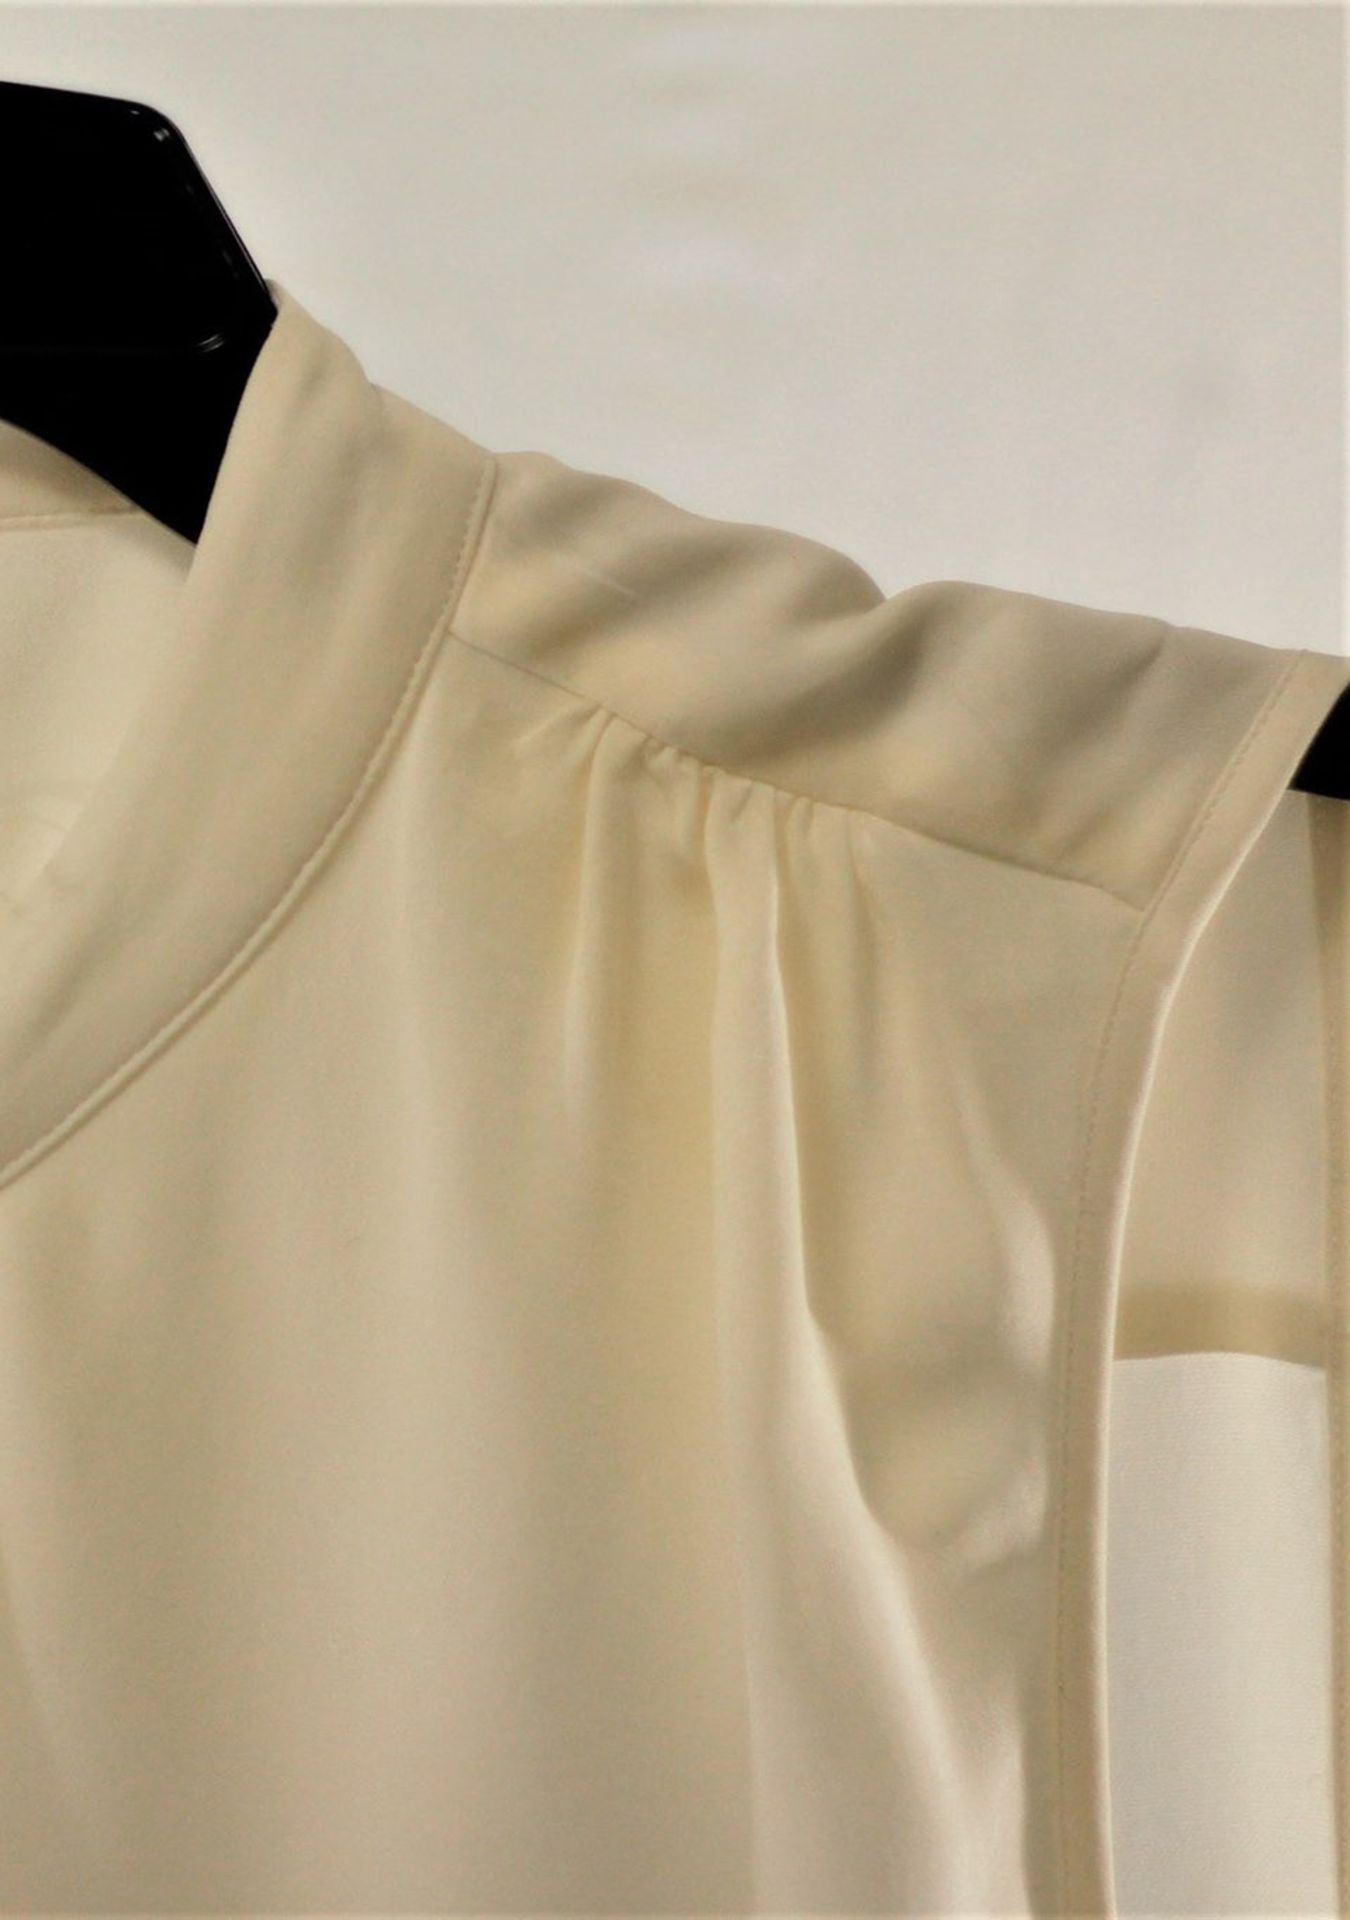 1 x Michael Kors Cream Blouse - Size: L - Material: 100% Silk - From a High End Clothing Boutique In - Image 3 of 4